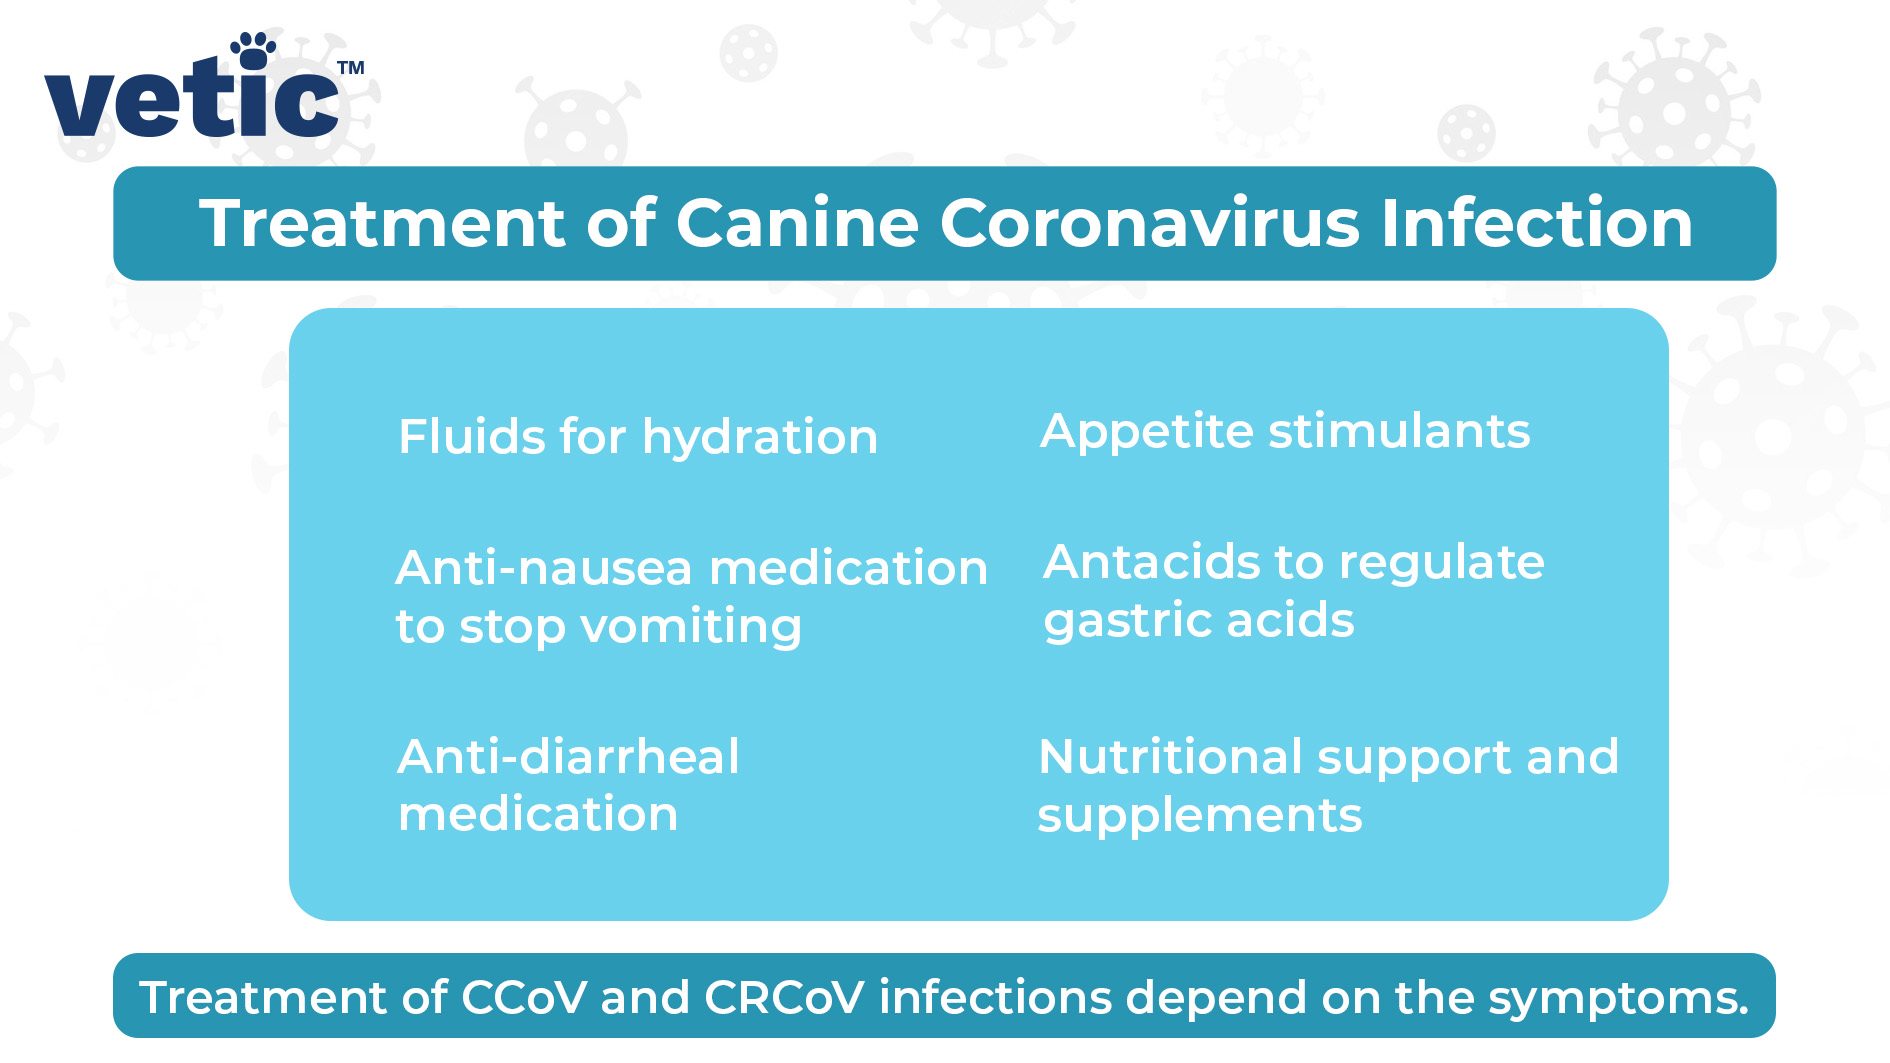 Canine coronavirus infection treatment is based on the symptoms. Treatment may include - Fluids for hydration Anti-nausea medication to stop vomiting Antacids to regulate gastric acids Anti-diarrheal medication Appetite stimulants Nutritional support and supplements Your dog may also receive nebulization or oxygen therapy for respiratory symptoms